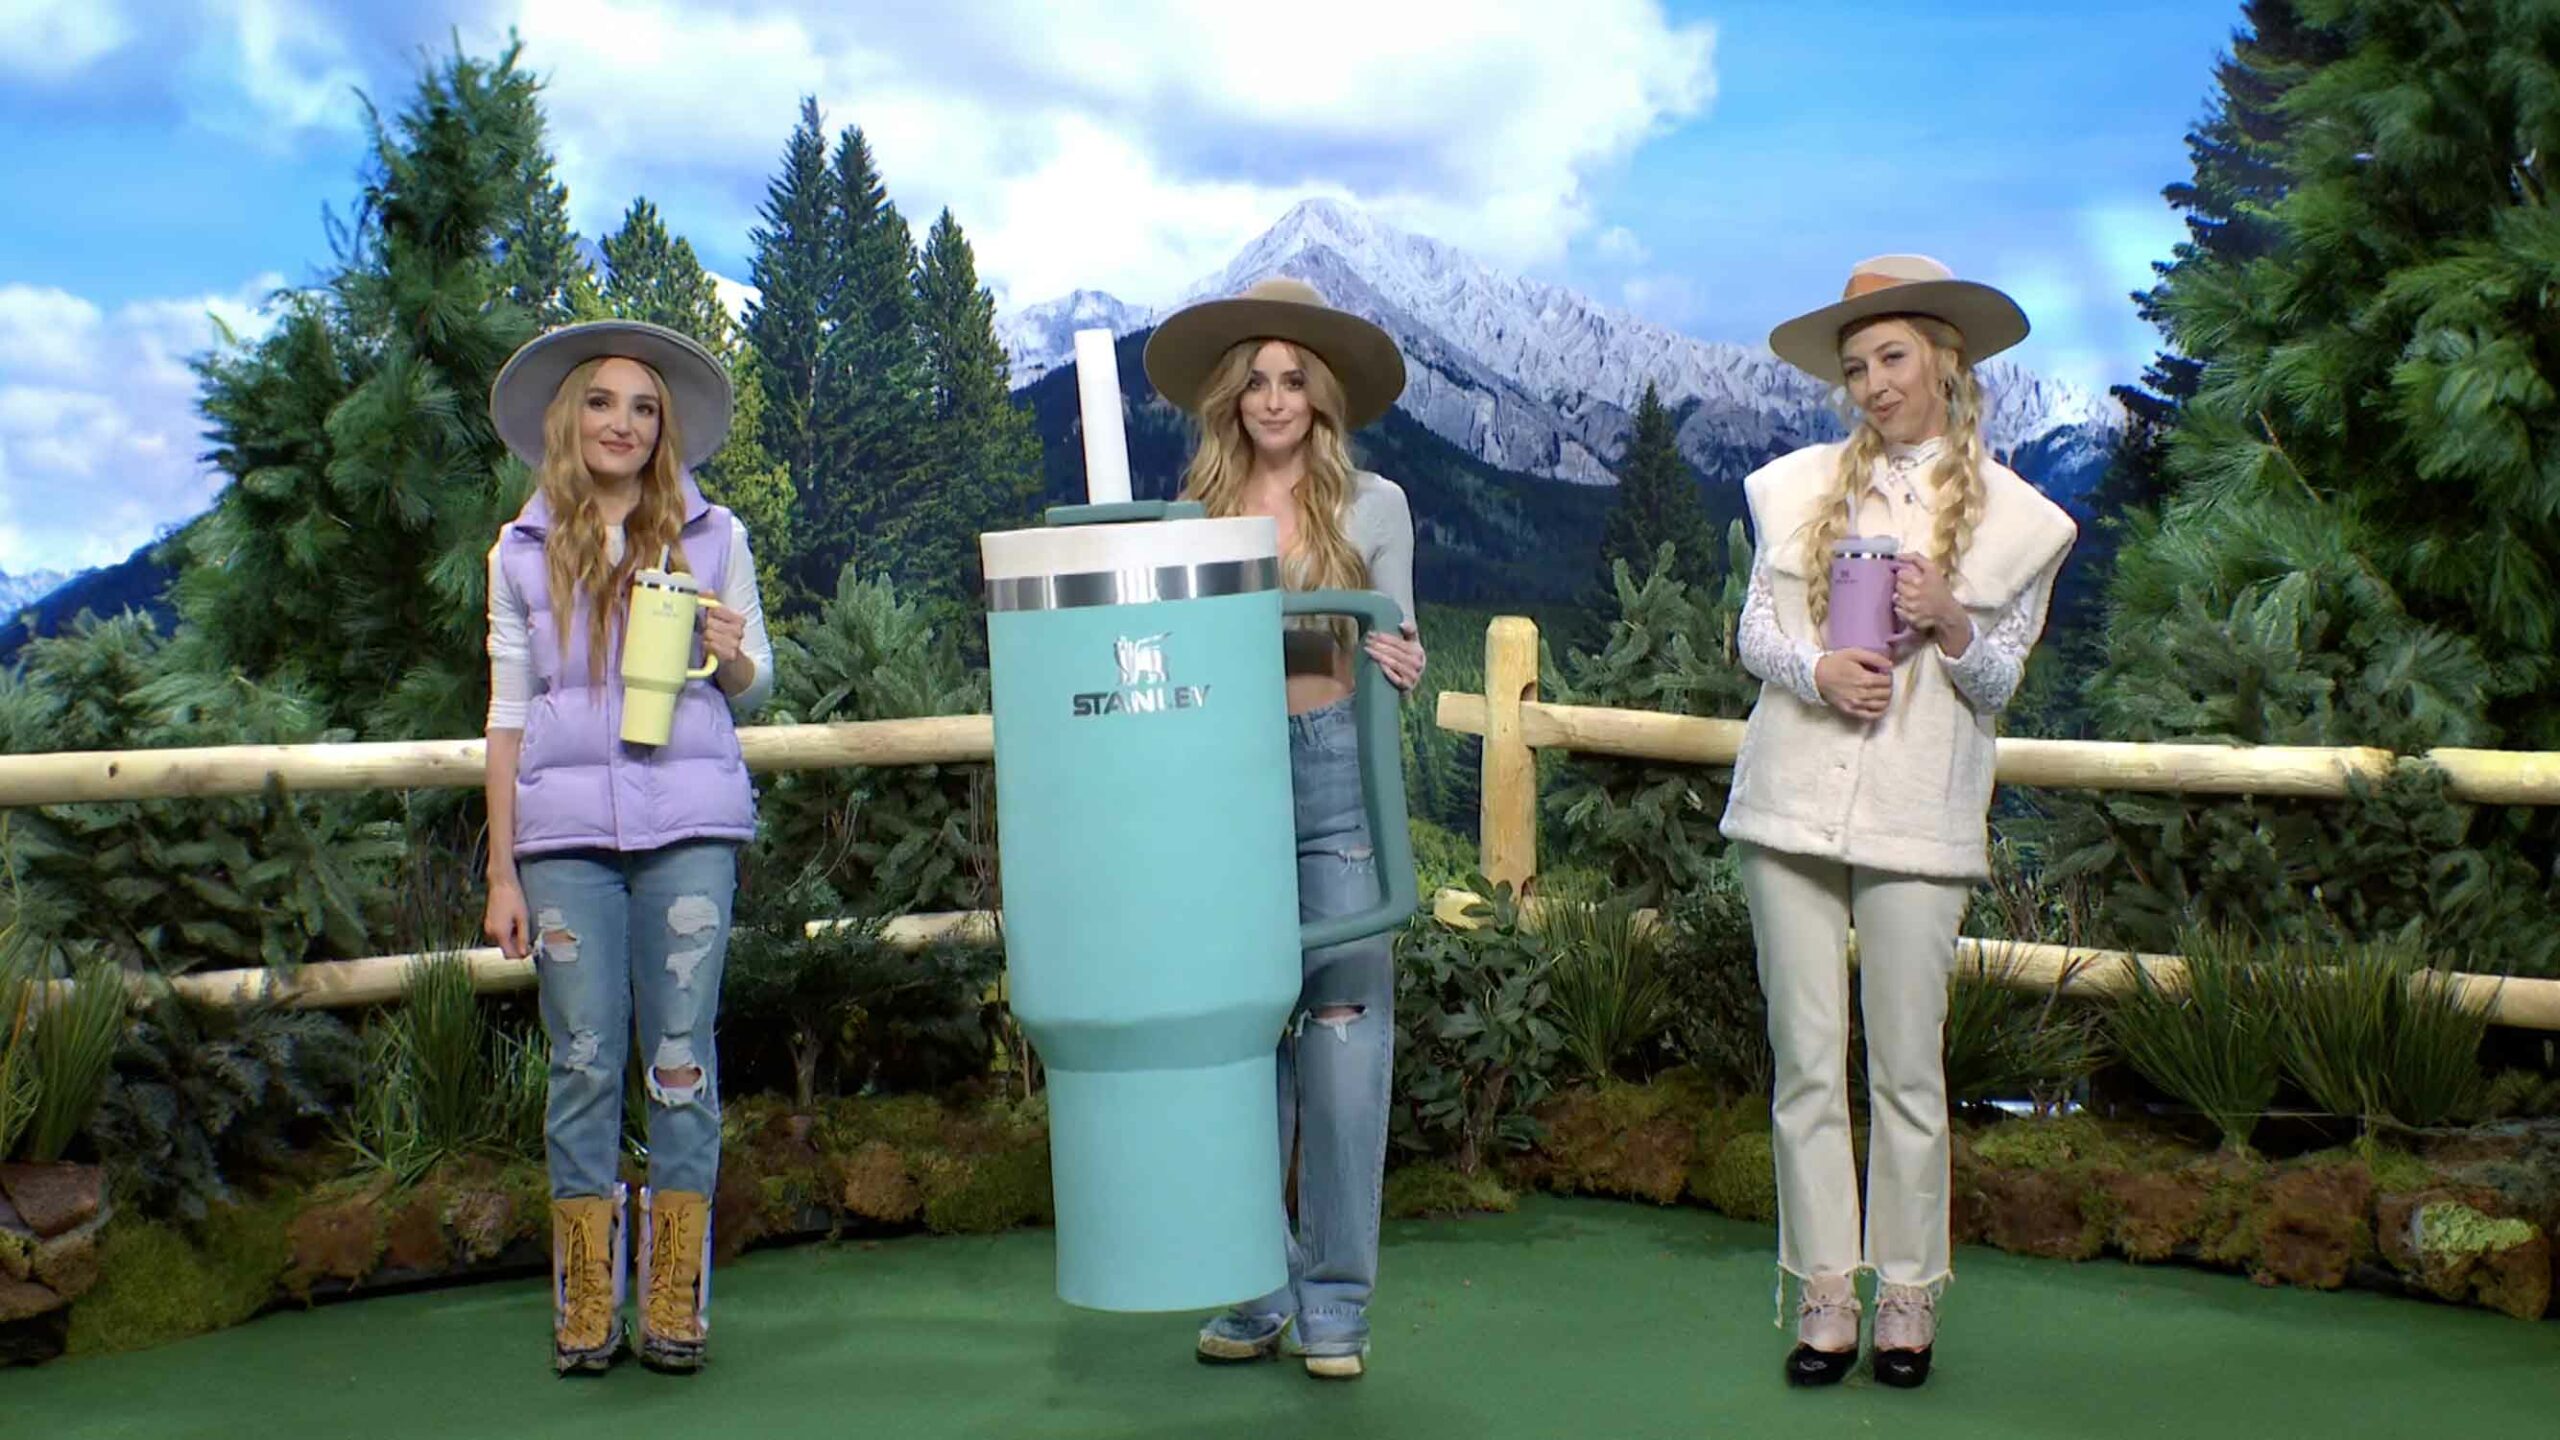 Big Dumb Cups, Hats, Cars, And Excessive Consumerism -- Three Girls In Hats Standing Next To A Large Container Known As A Big Dumb Cup Or The Stanley Cup.